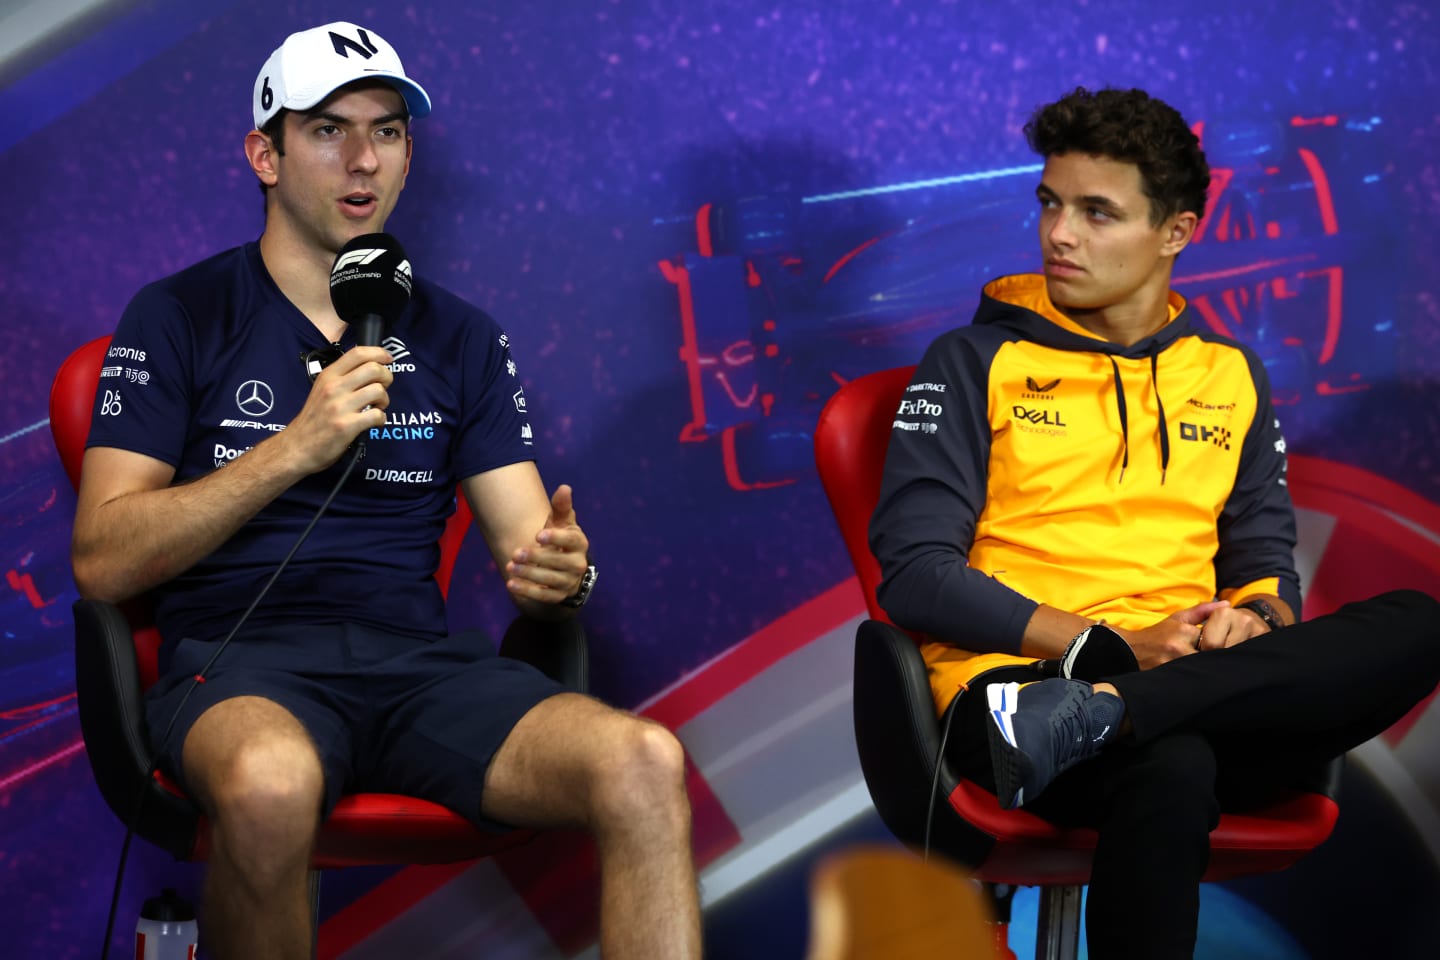 LE CASTELLET, FRANCE - JULY 21: Nicholas Latifi of Canada and Williams and Lando Norris of Great Britain and McLaren talk in the Drivers Press Conference during previews ahead of the F1 Grand Prix of France at Circuit Paul Ricard on July 21, 2022 in Le Castellet, France. (Photo by Bryn Lennon/Getty Images)